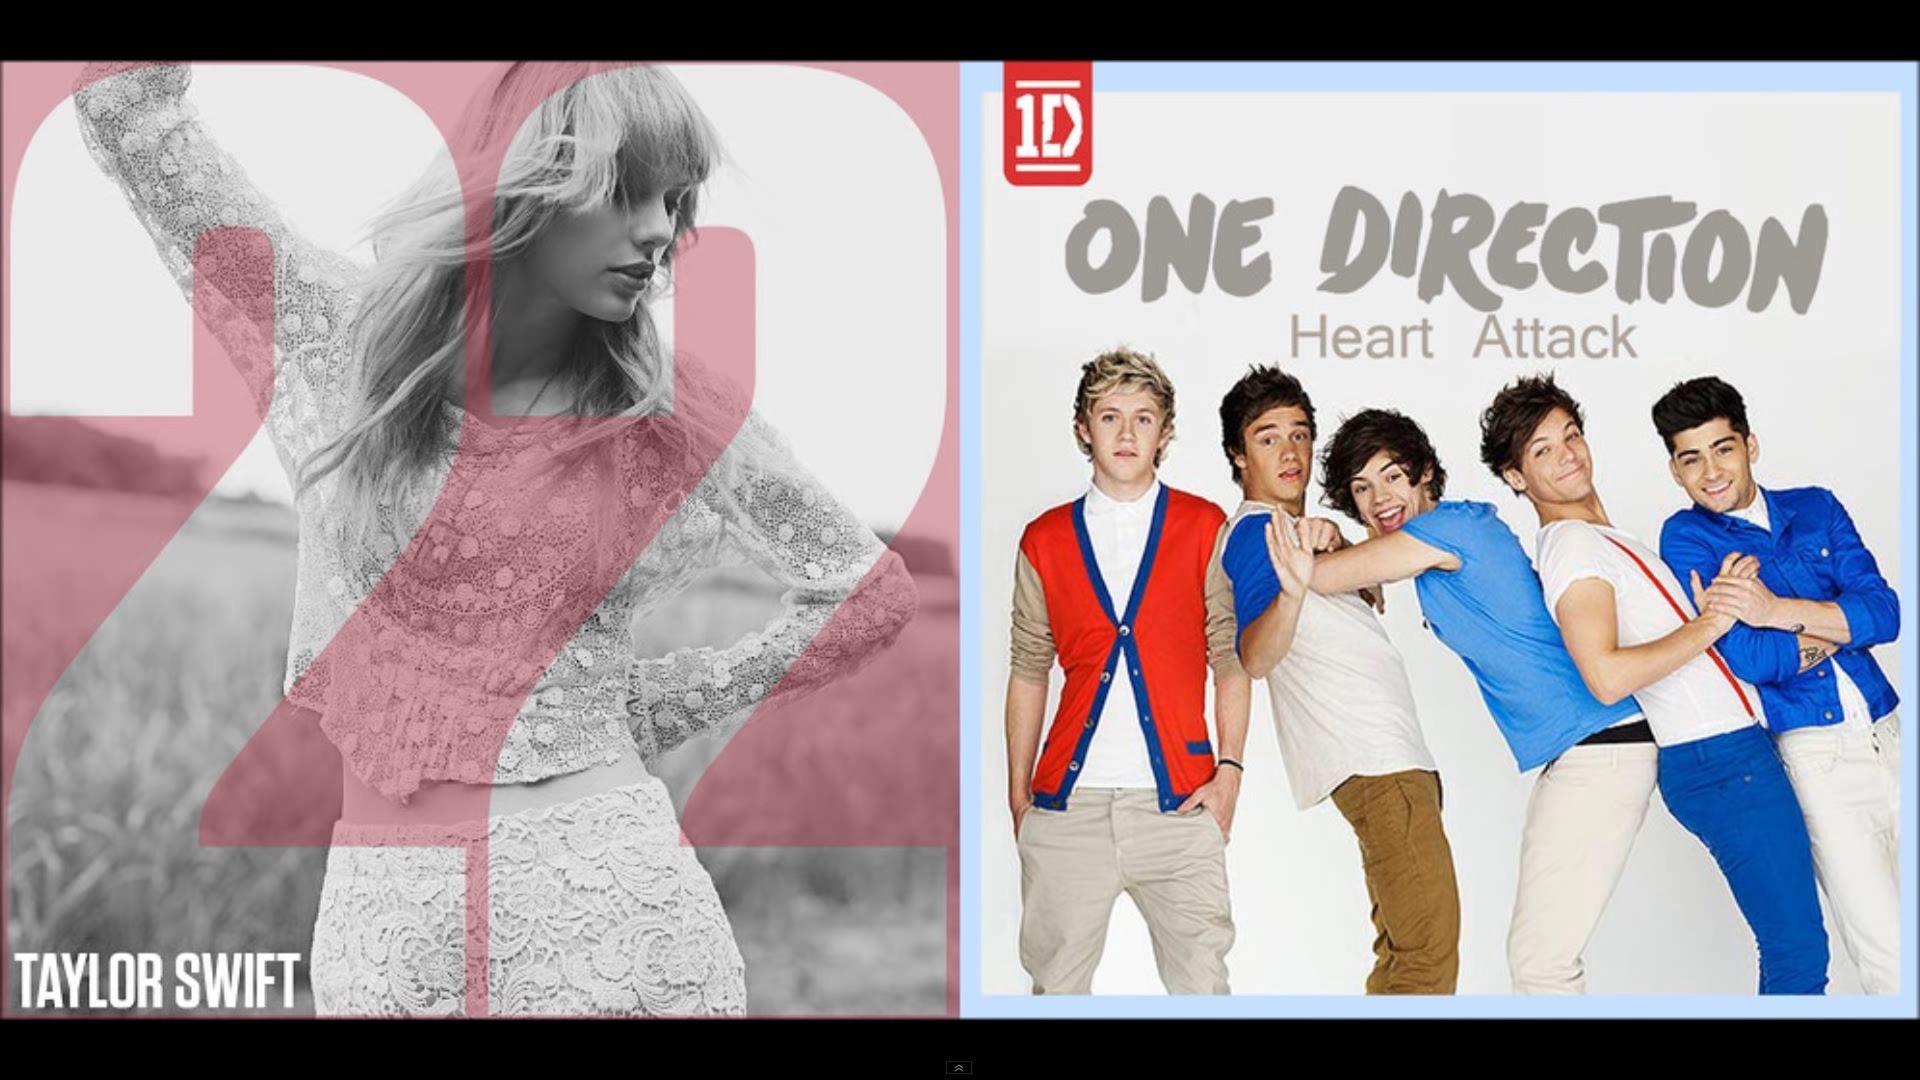 Taylor Swift & One Direction - Heart Attack at 22 (Mashup)